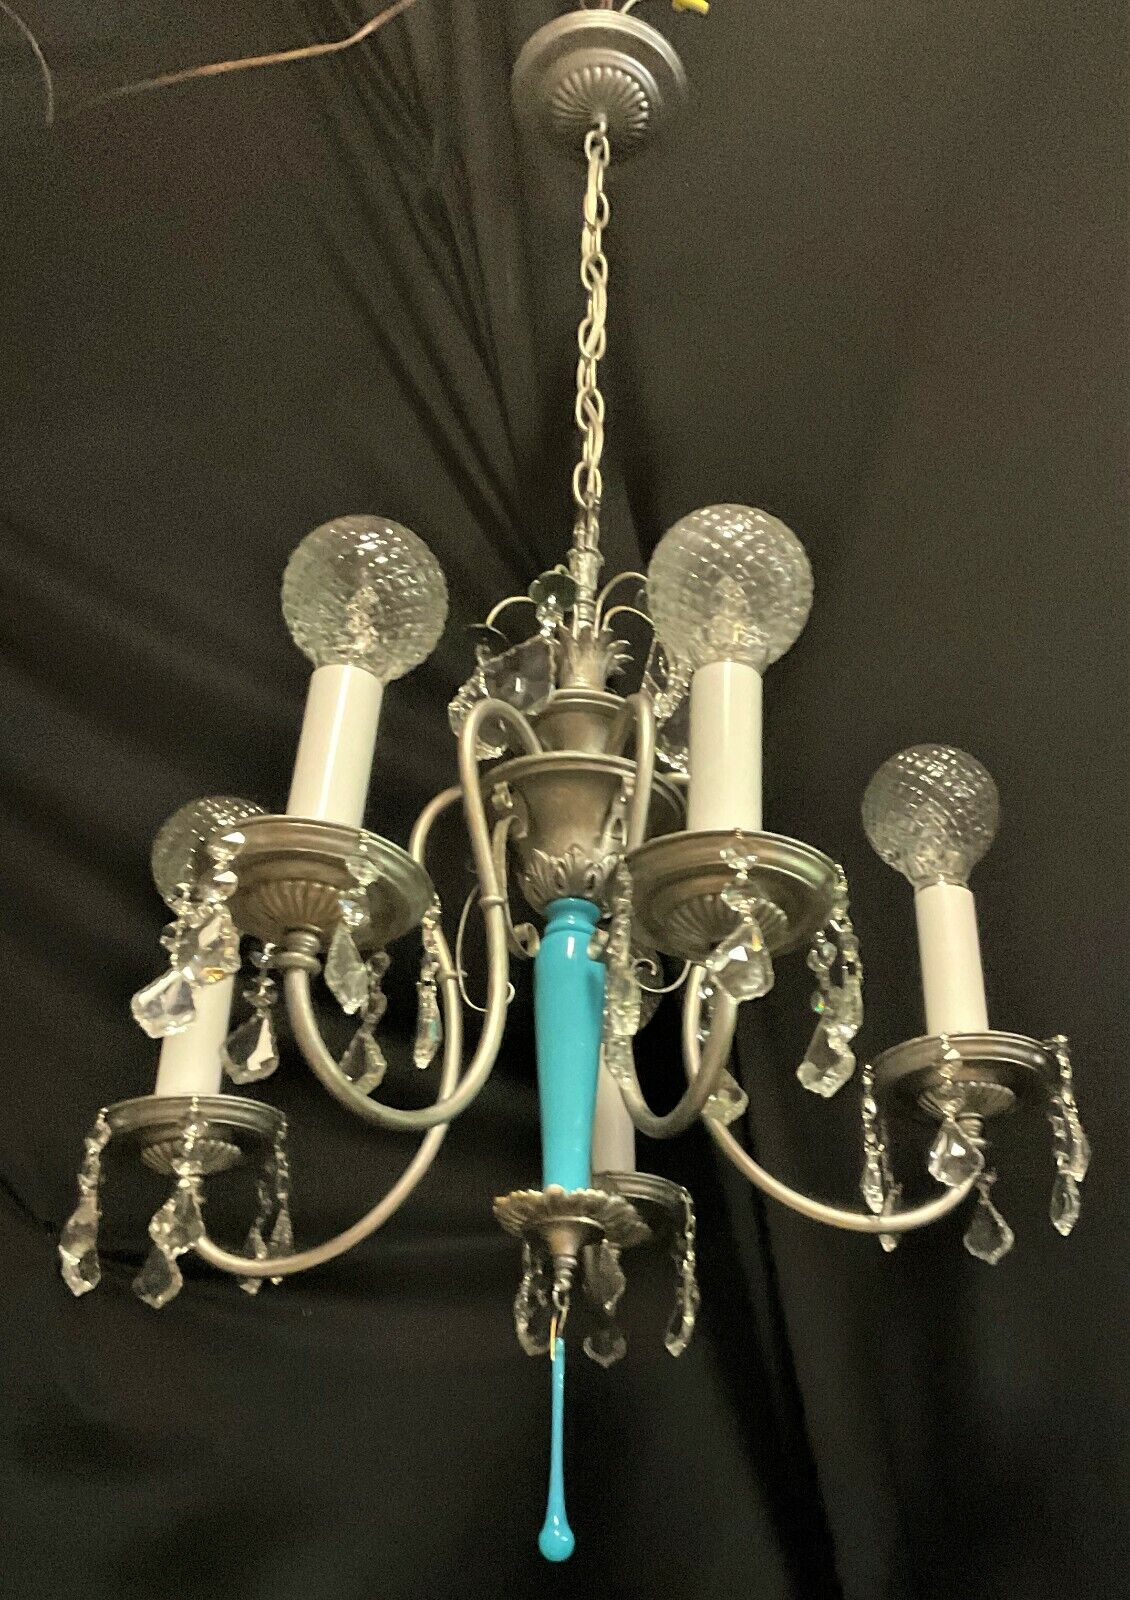 VTG DECO PERIOD FRENCH  CRYSTALS SILVER CHANDELIER CEILING FIXTURE 1920's